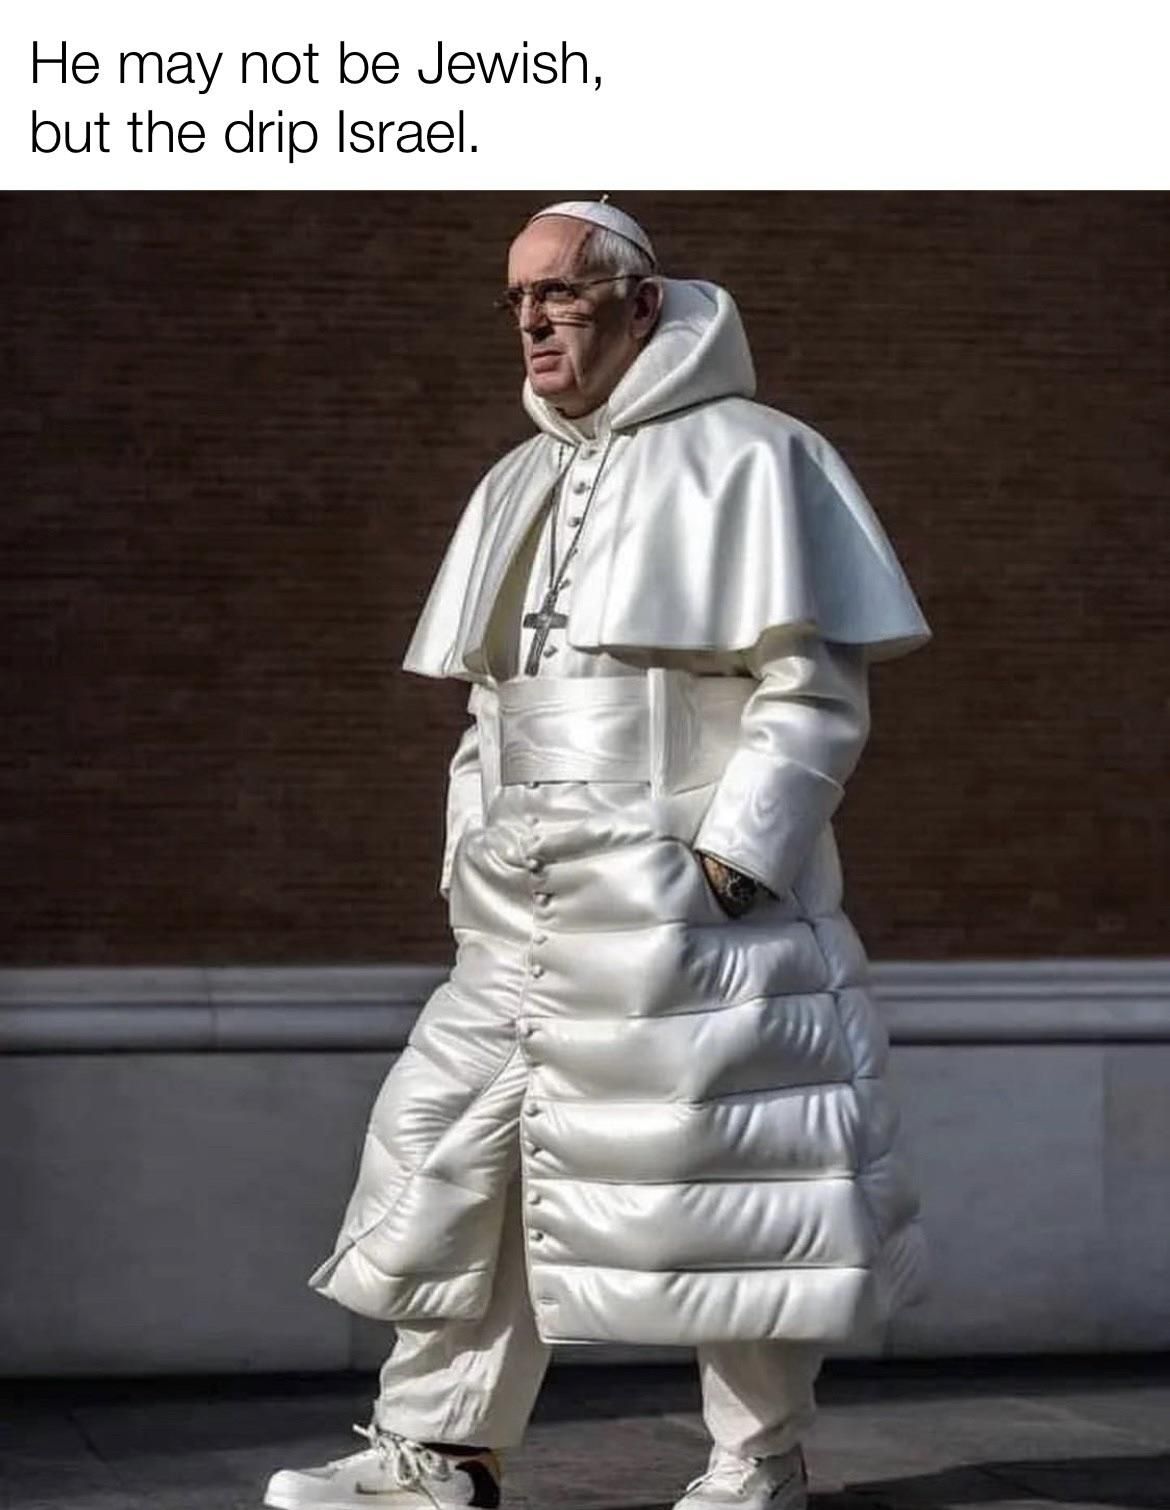 The pope has me jealous